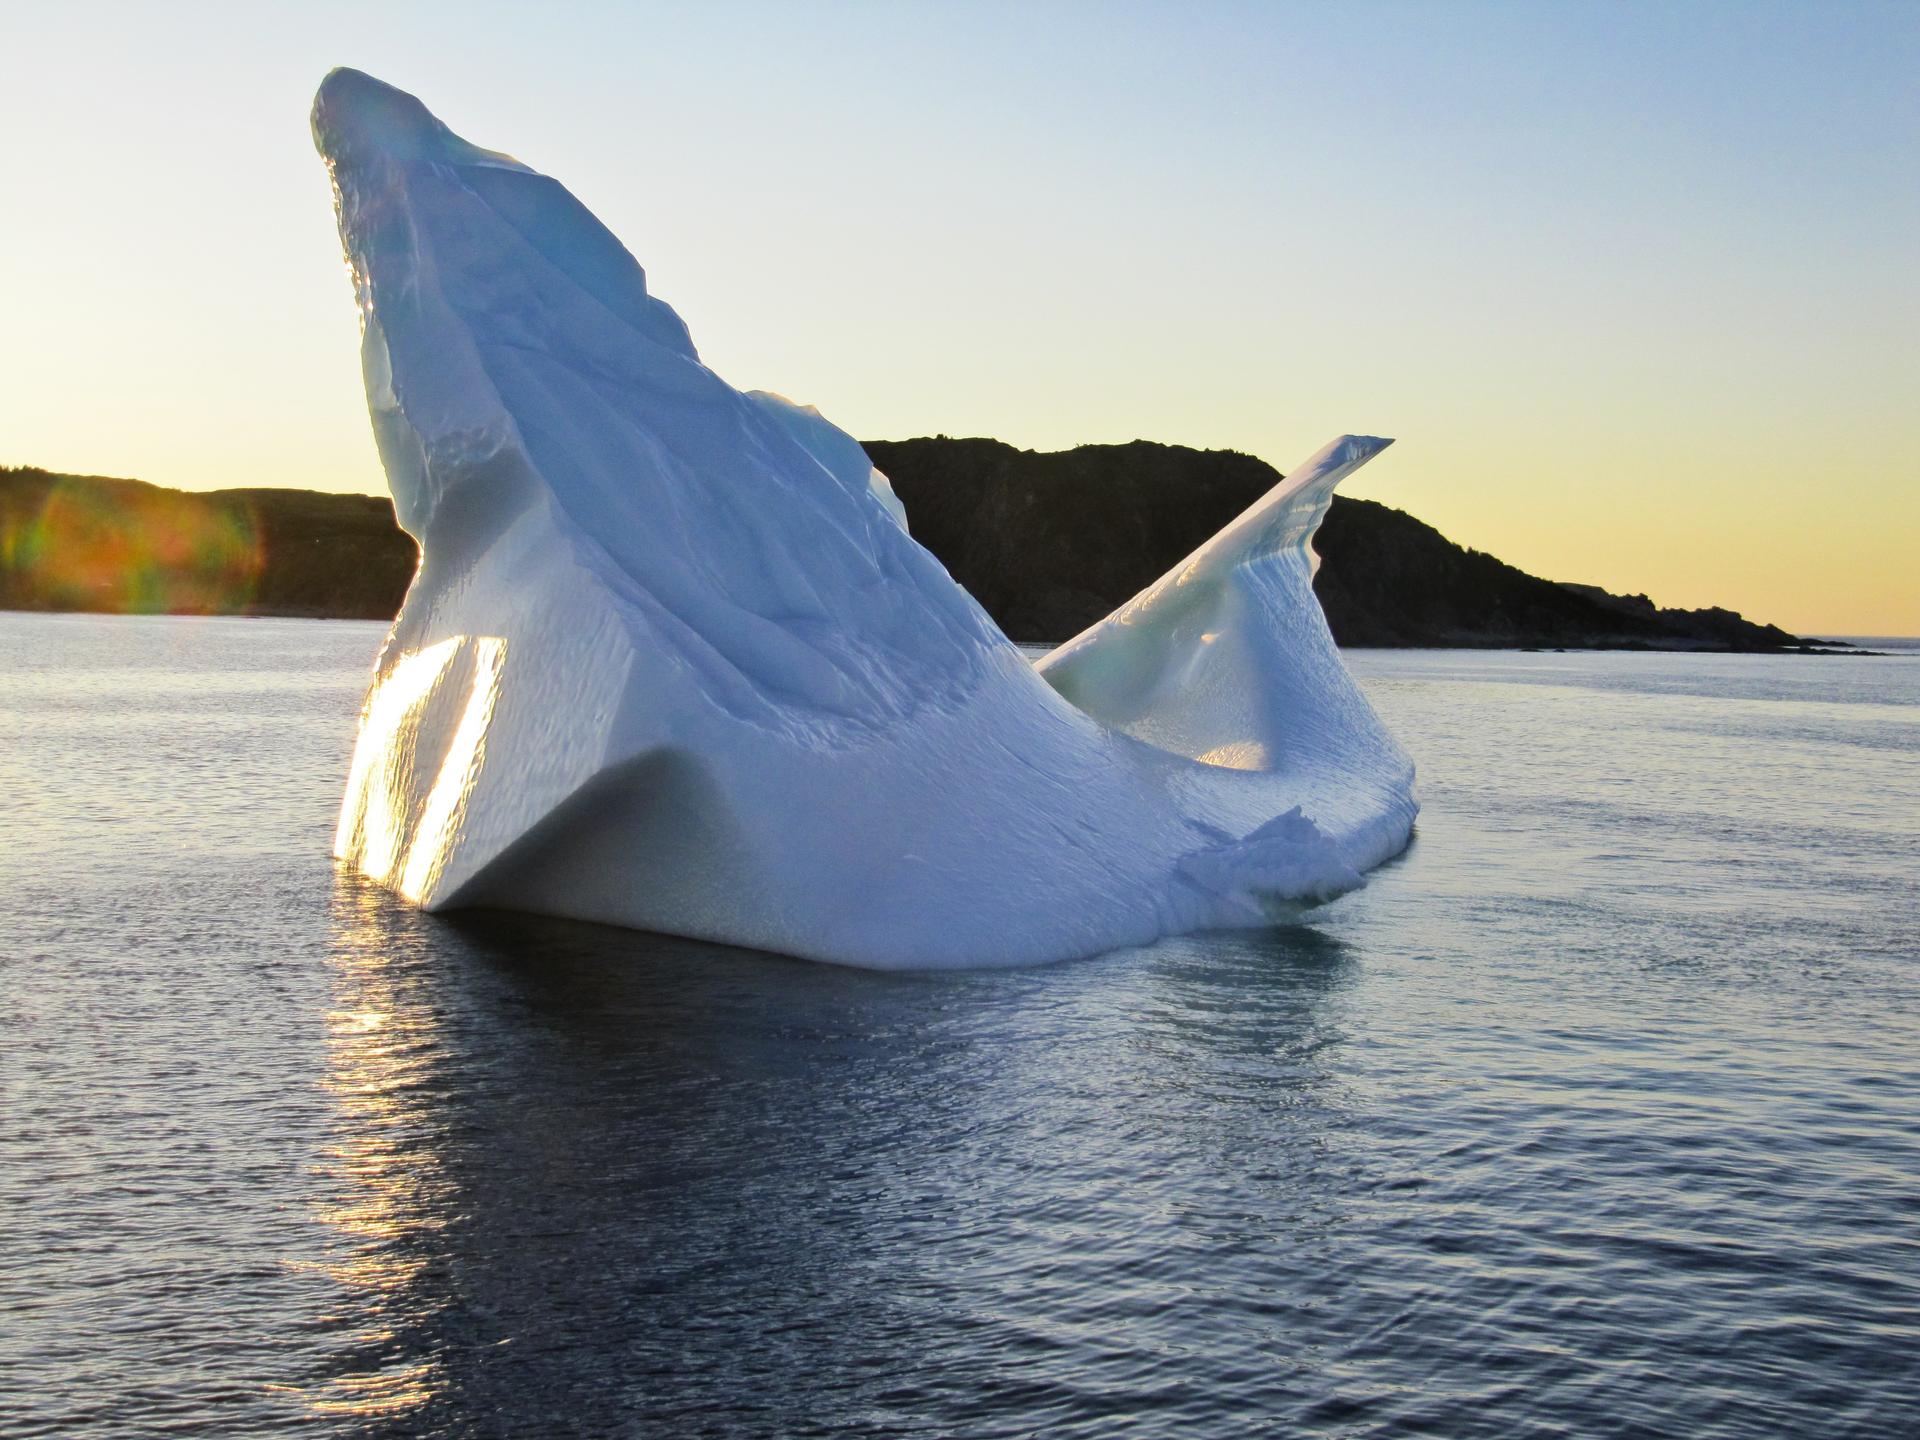 10,000-year old icebergs float down from the high Arctic in spring and early summer